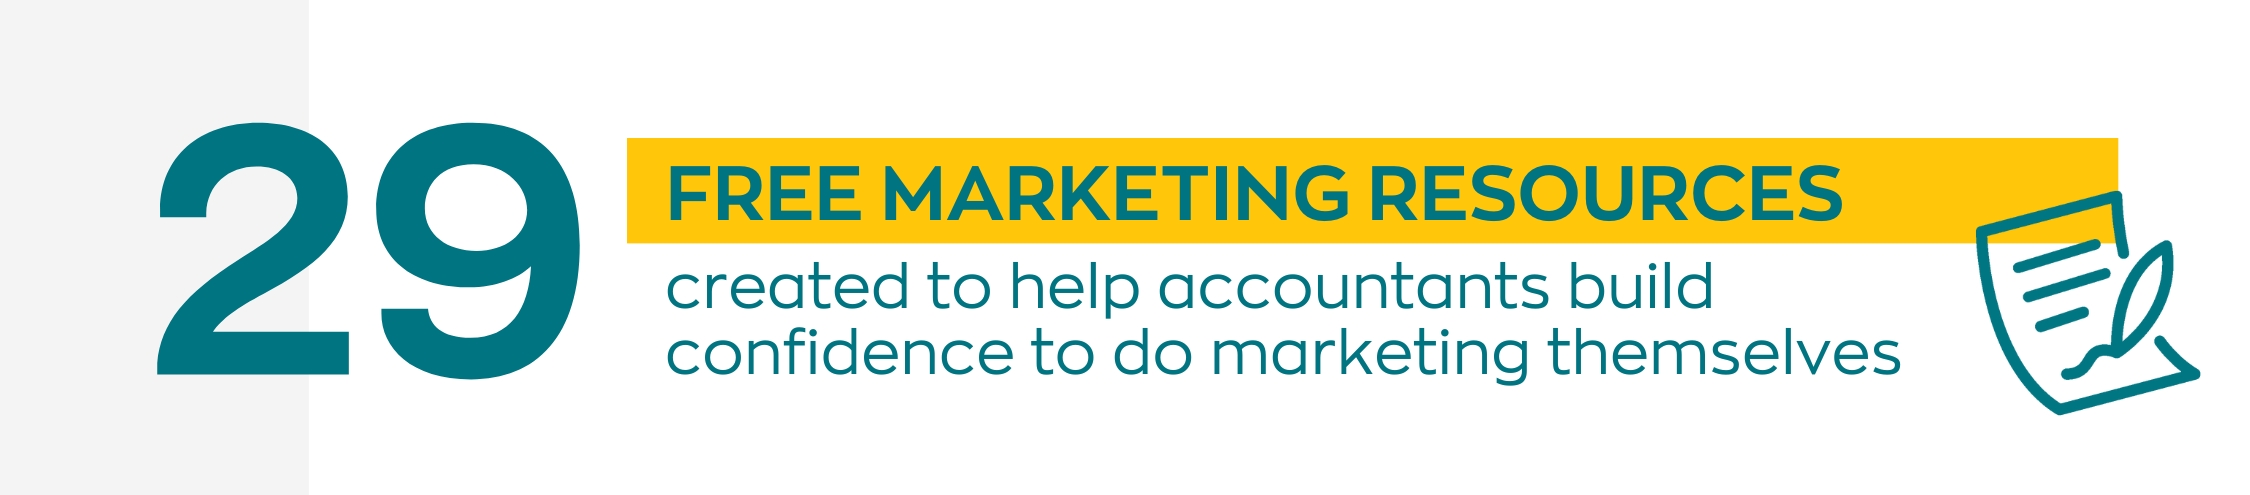 29 free marketing resources created to help accountants build confidence to do marketing themselves